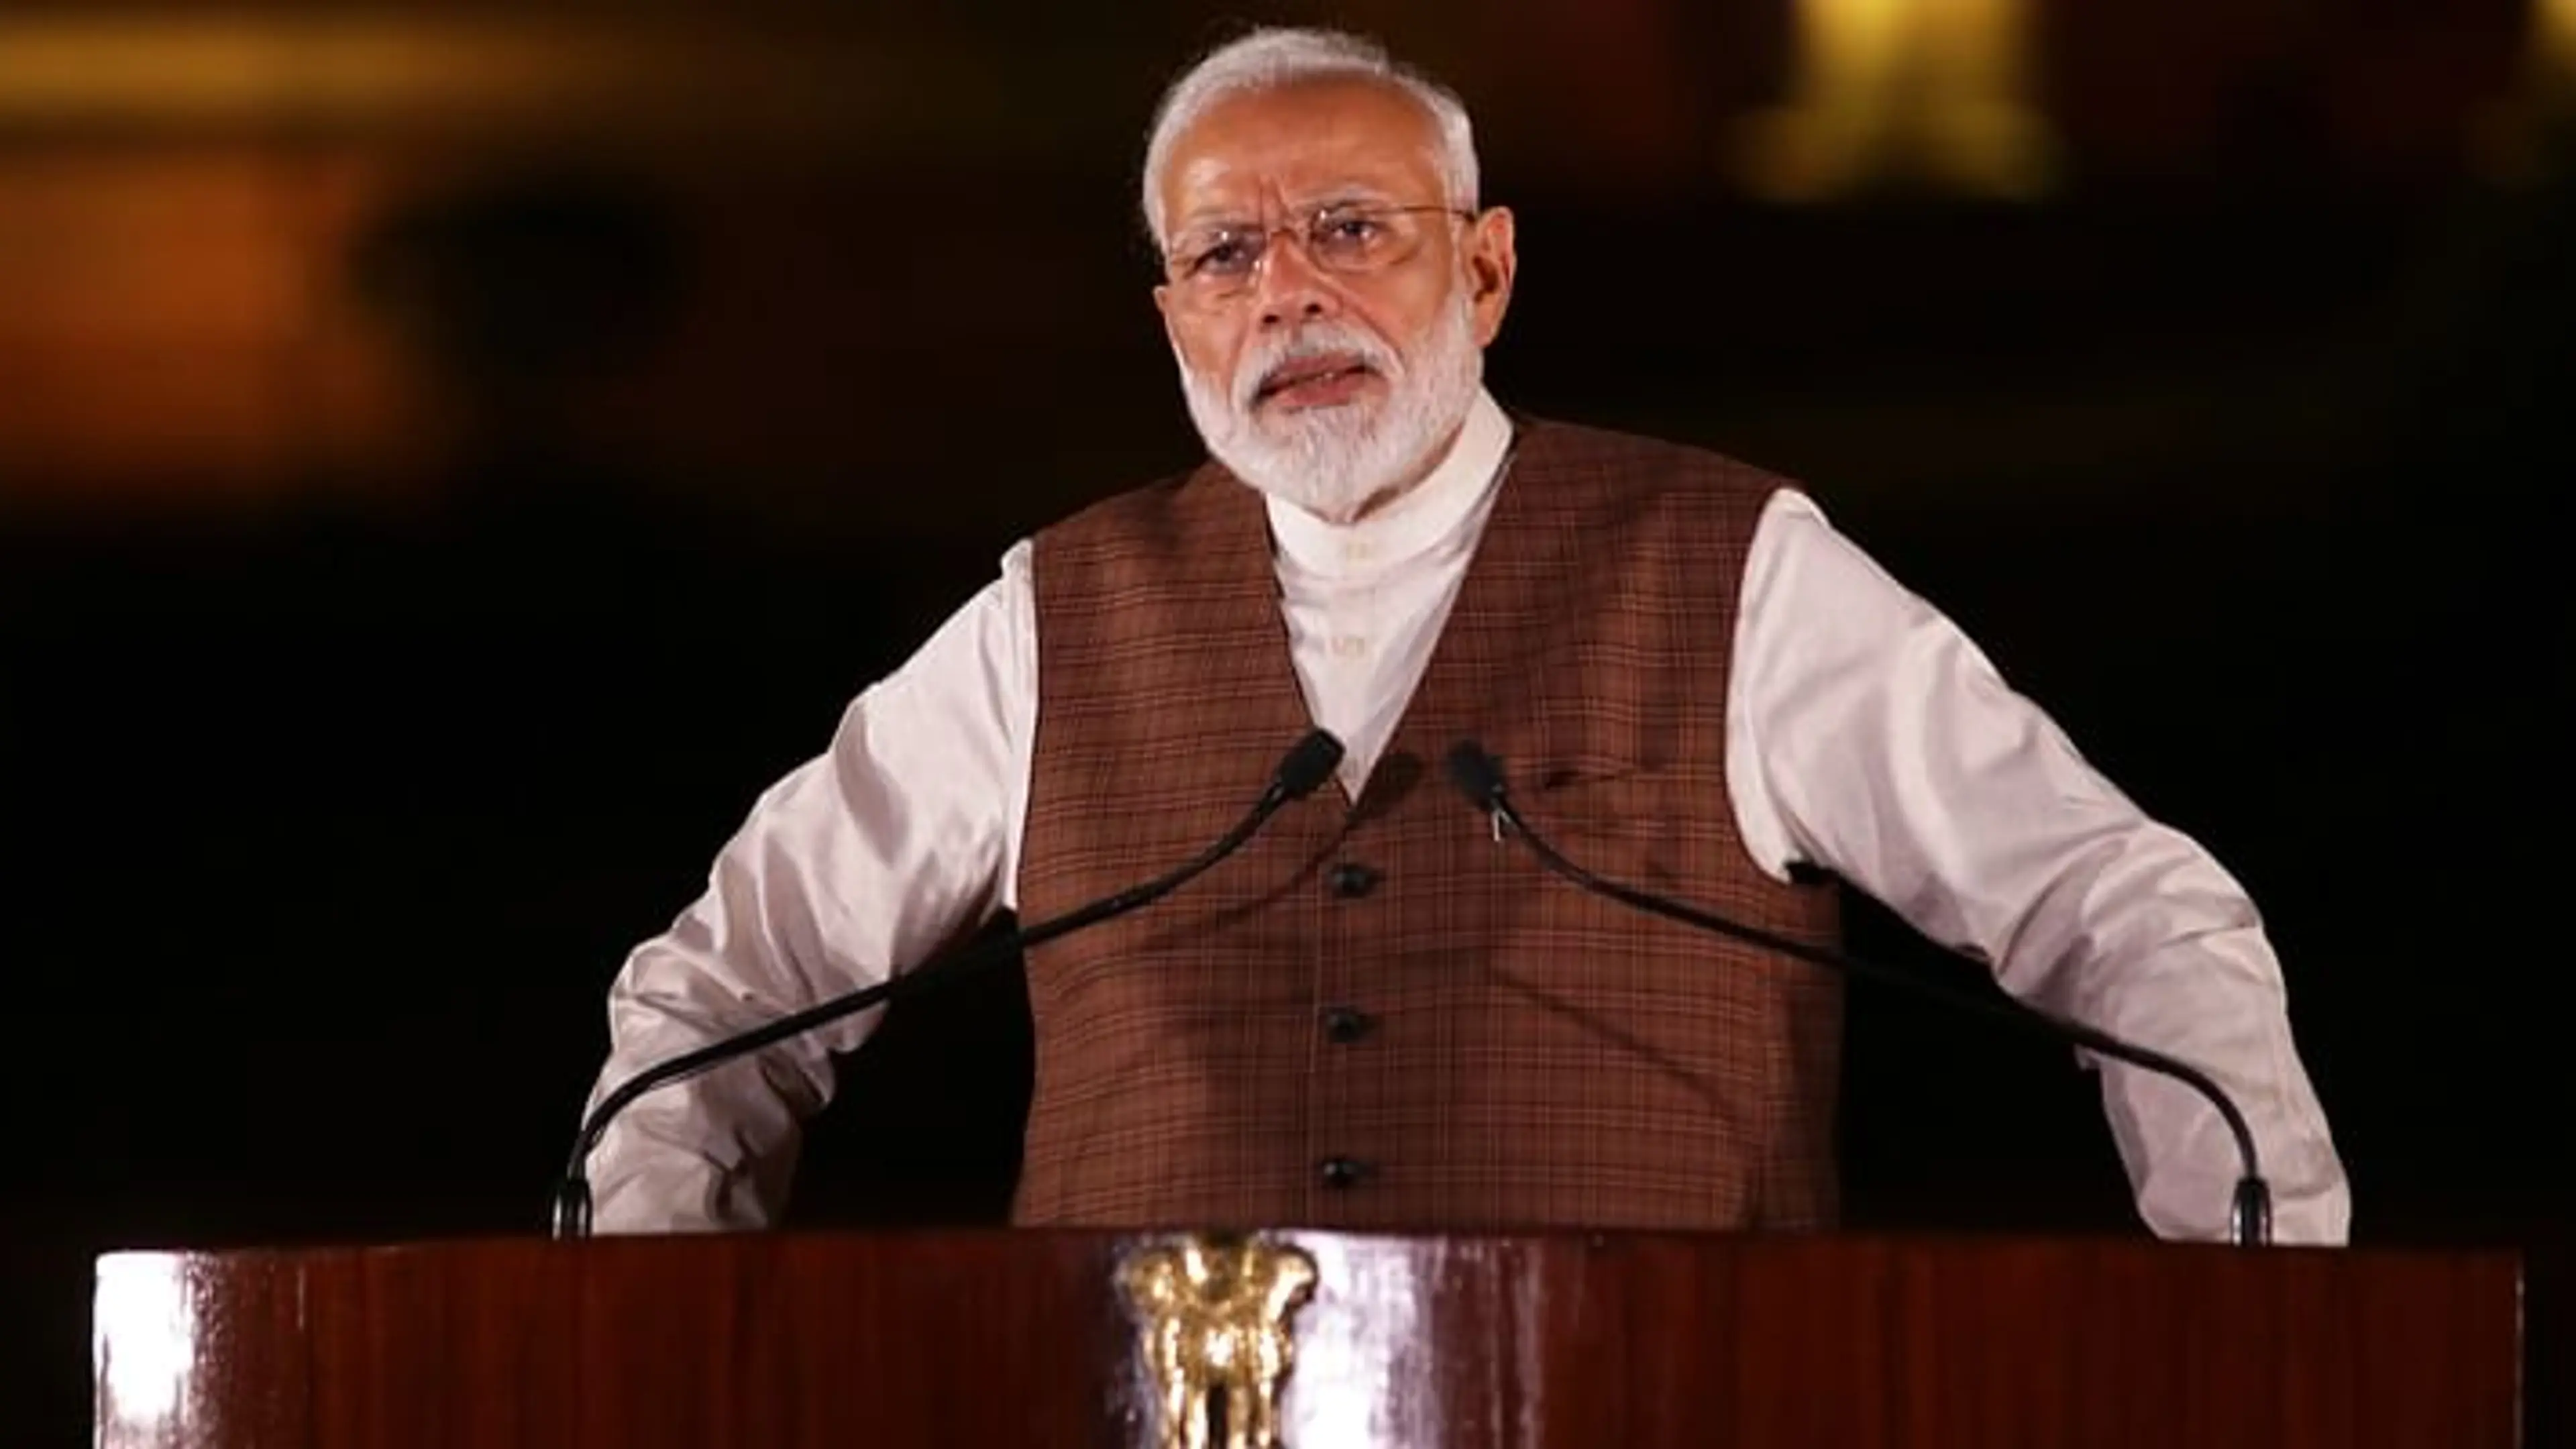 PM Modi invites Canadian businesses to invest in education, agriculture, manufacturing sectors